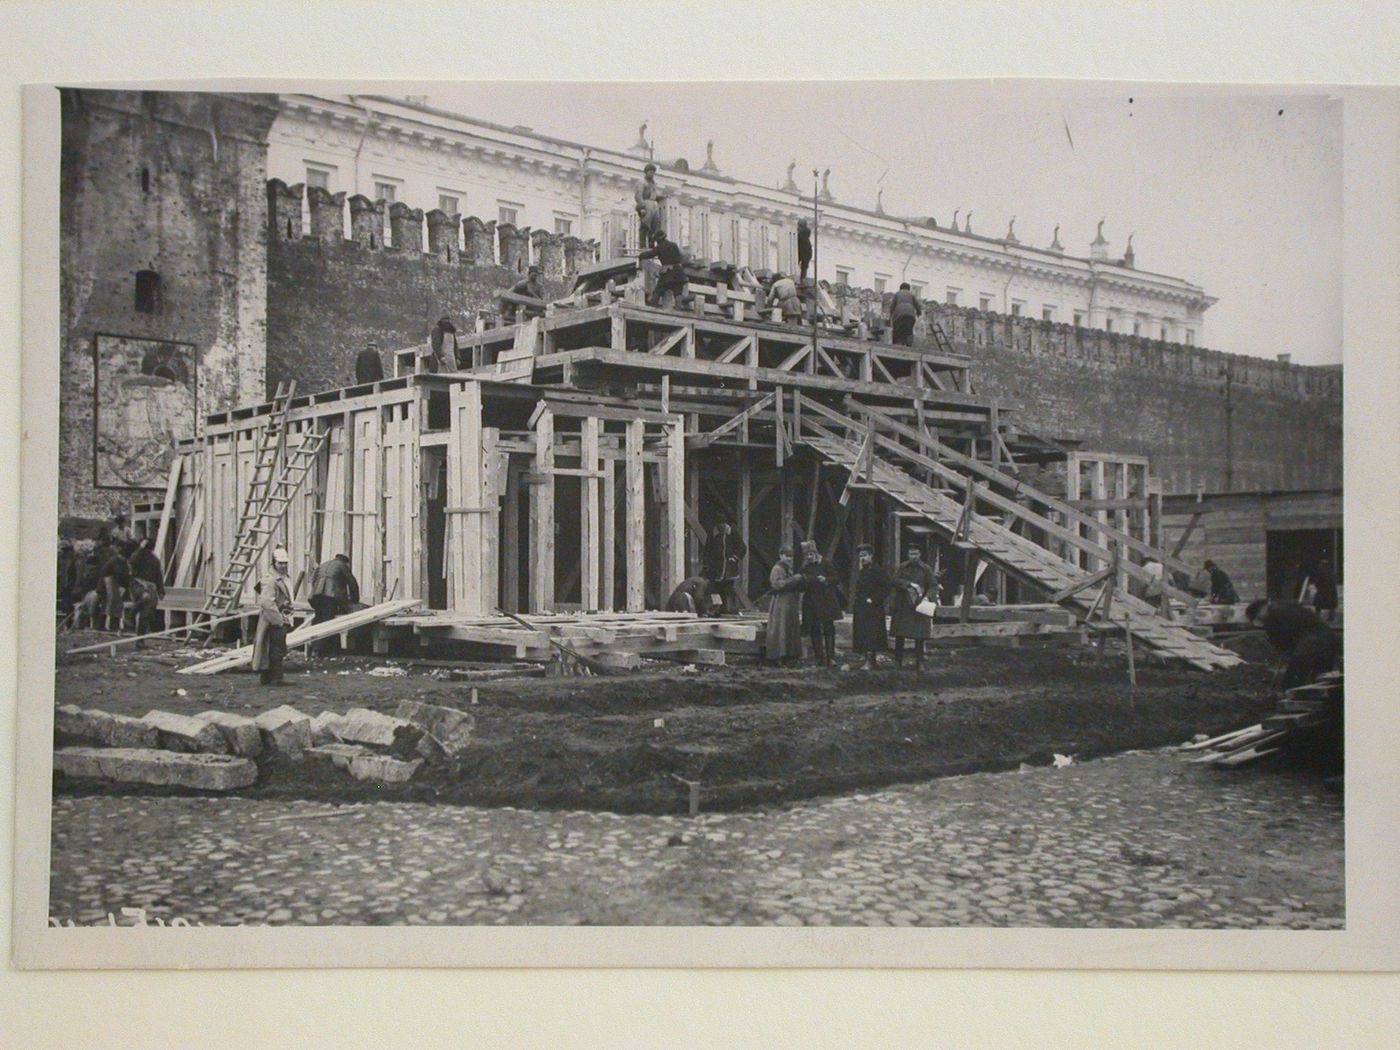 View of the second wooden Lenin Mausoleum under construction showing workers and officials, Red Square, Moscow